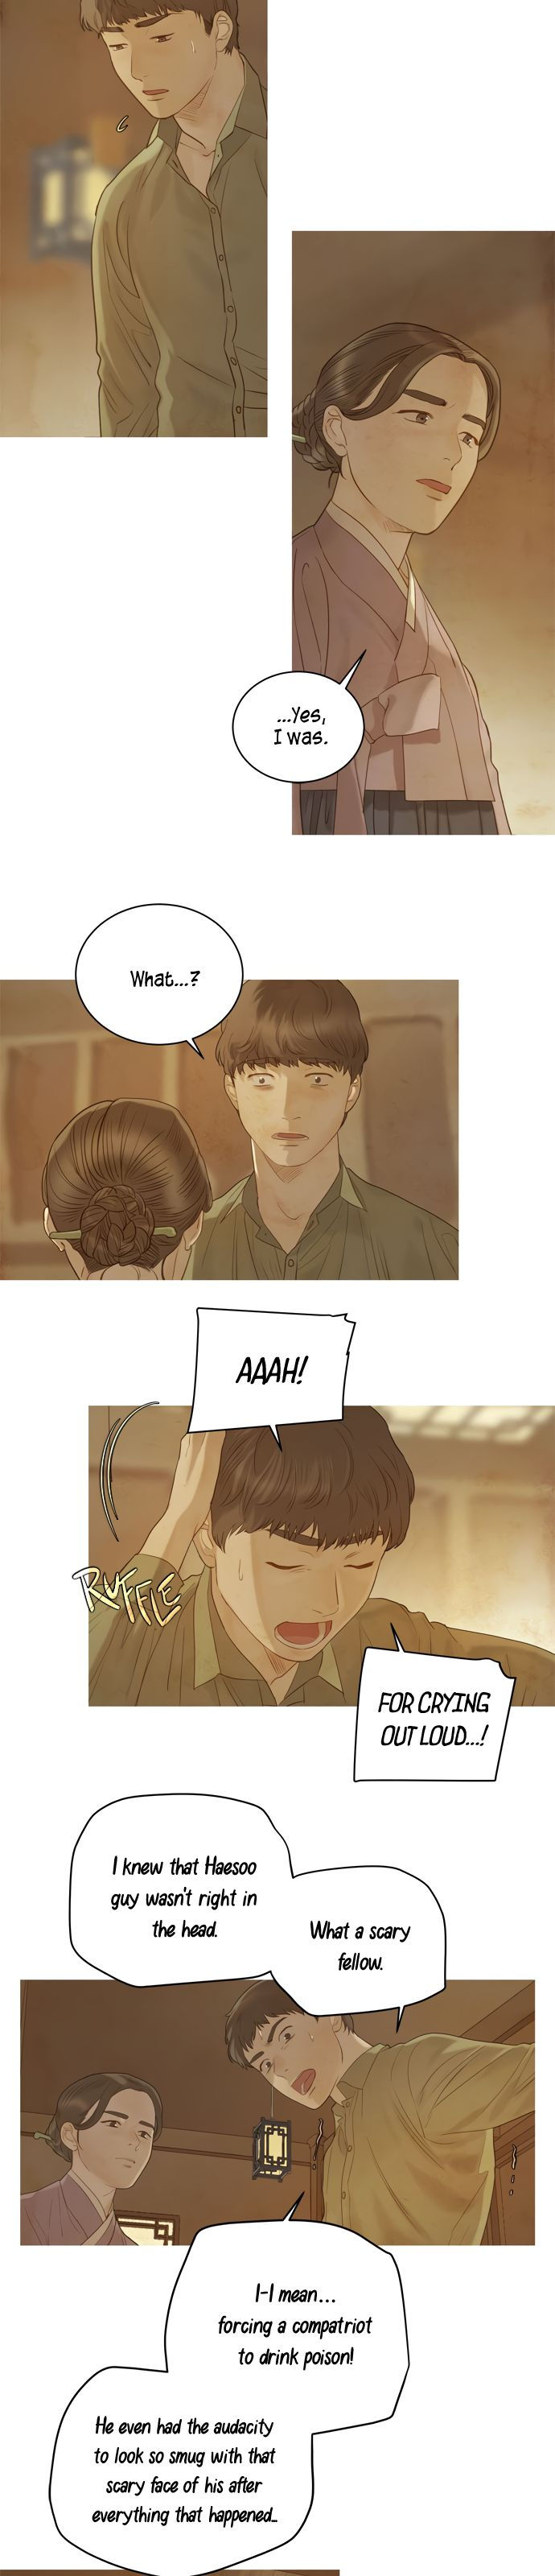 Gorae Byul - The Gyeongseong Mermaid - Chapter 20 Page 21